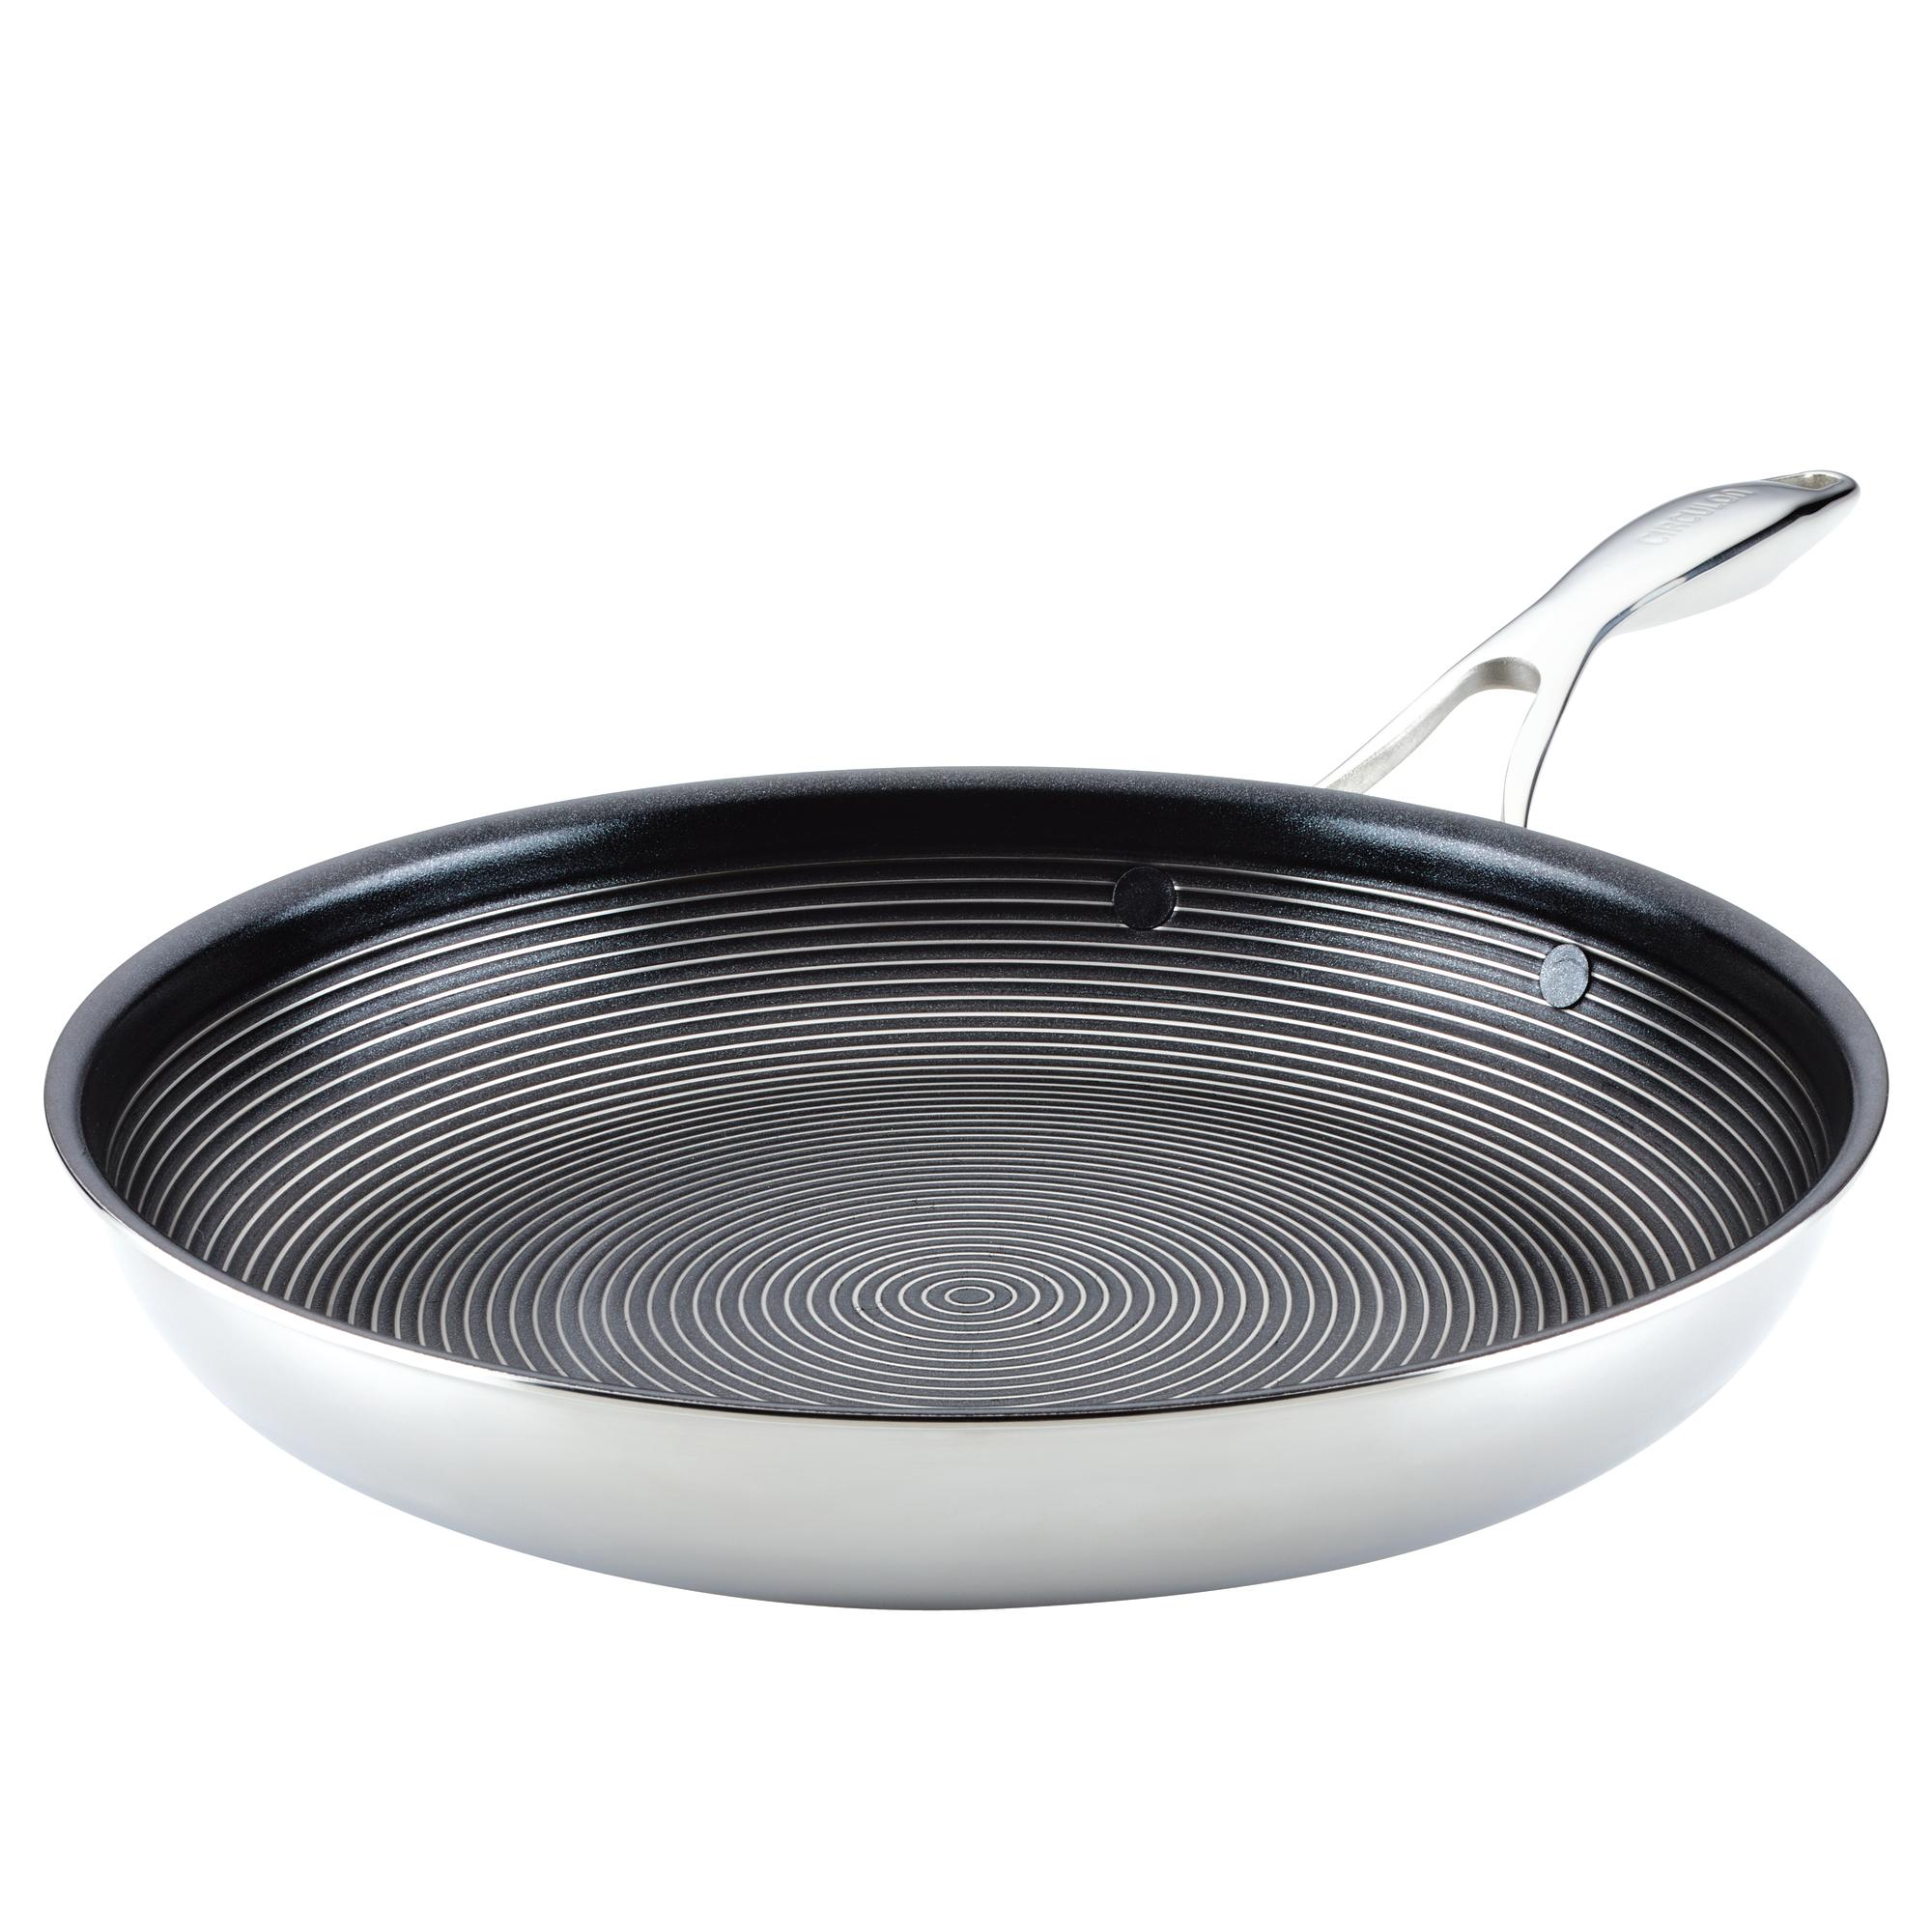 HEXCLAD hexclad 12 inch hybrid stainless steel griddle non stick fry pan  with stay-cool handle - pfoa free, dishwasher and oven safe